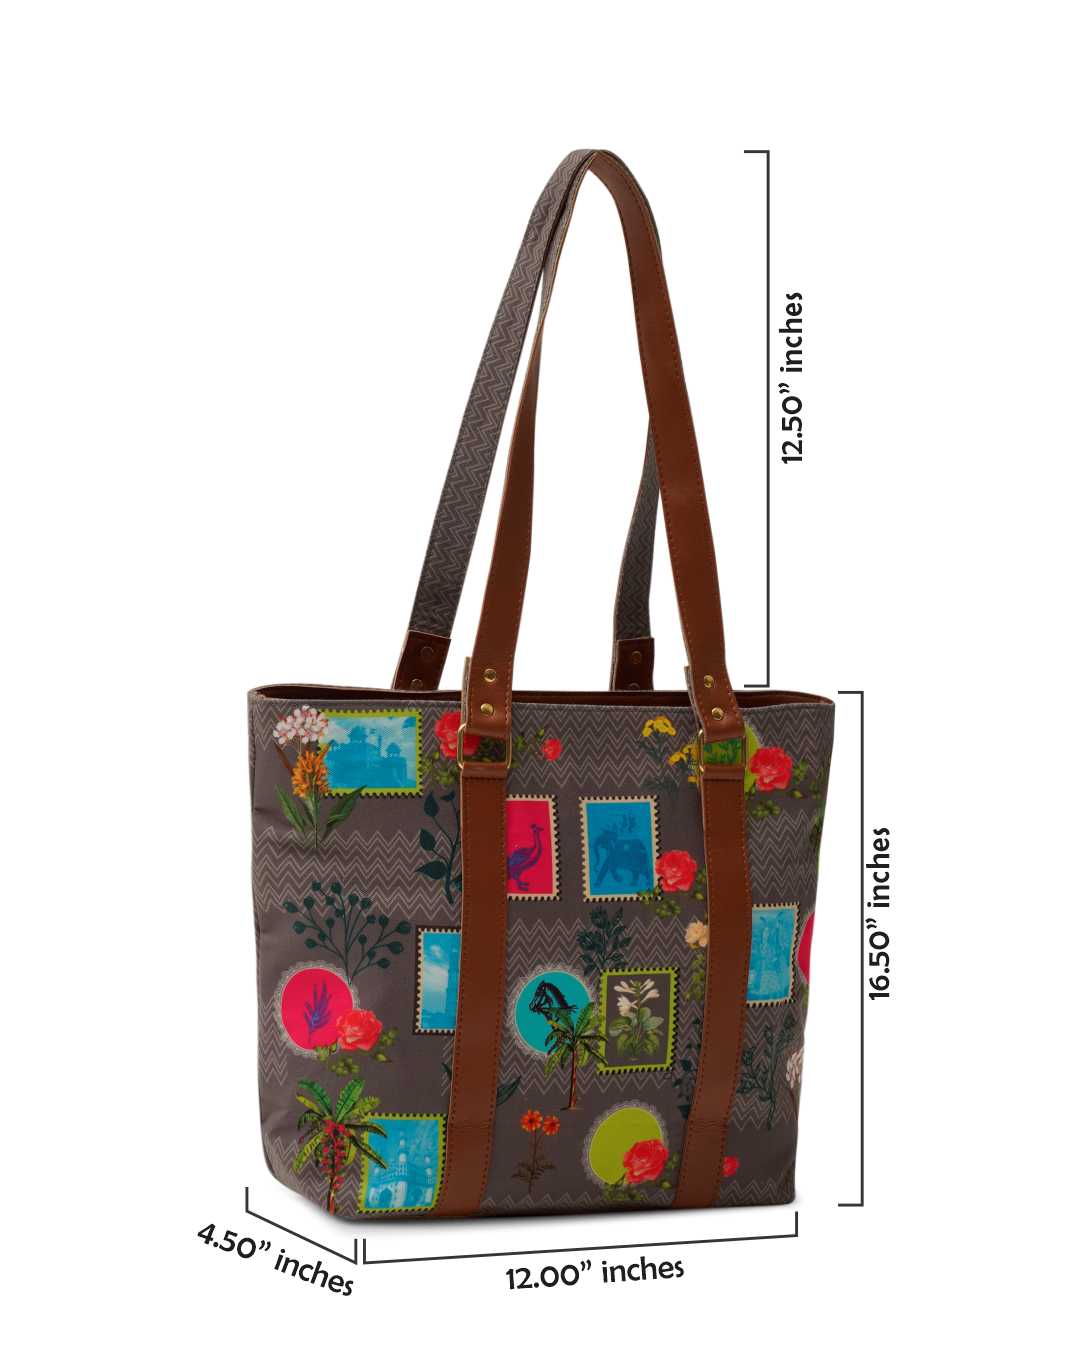 Do you know how to measure a tote bag? – Canvas Tote Bags In The News